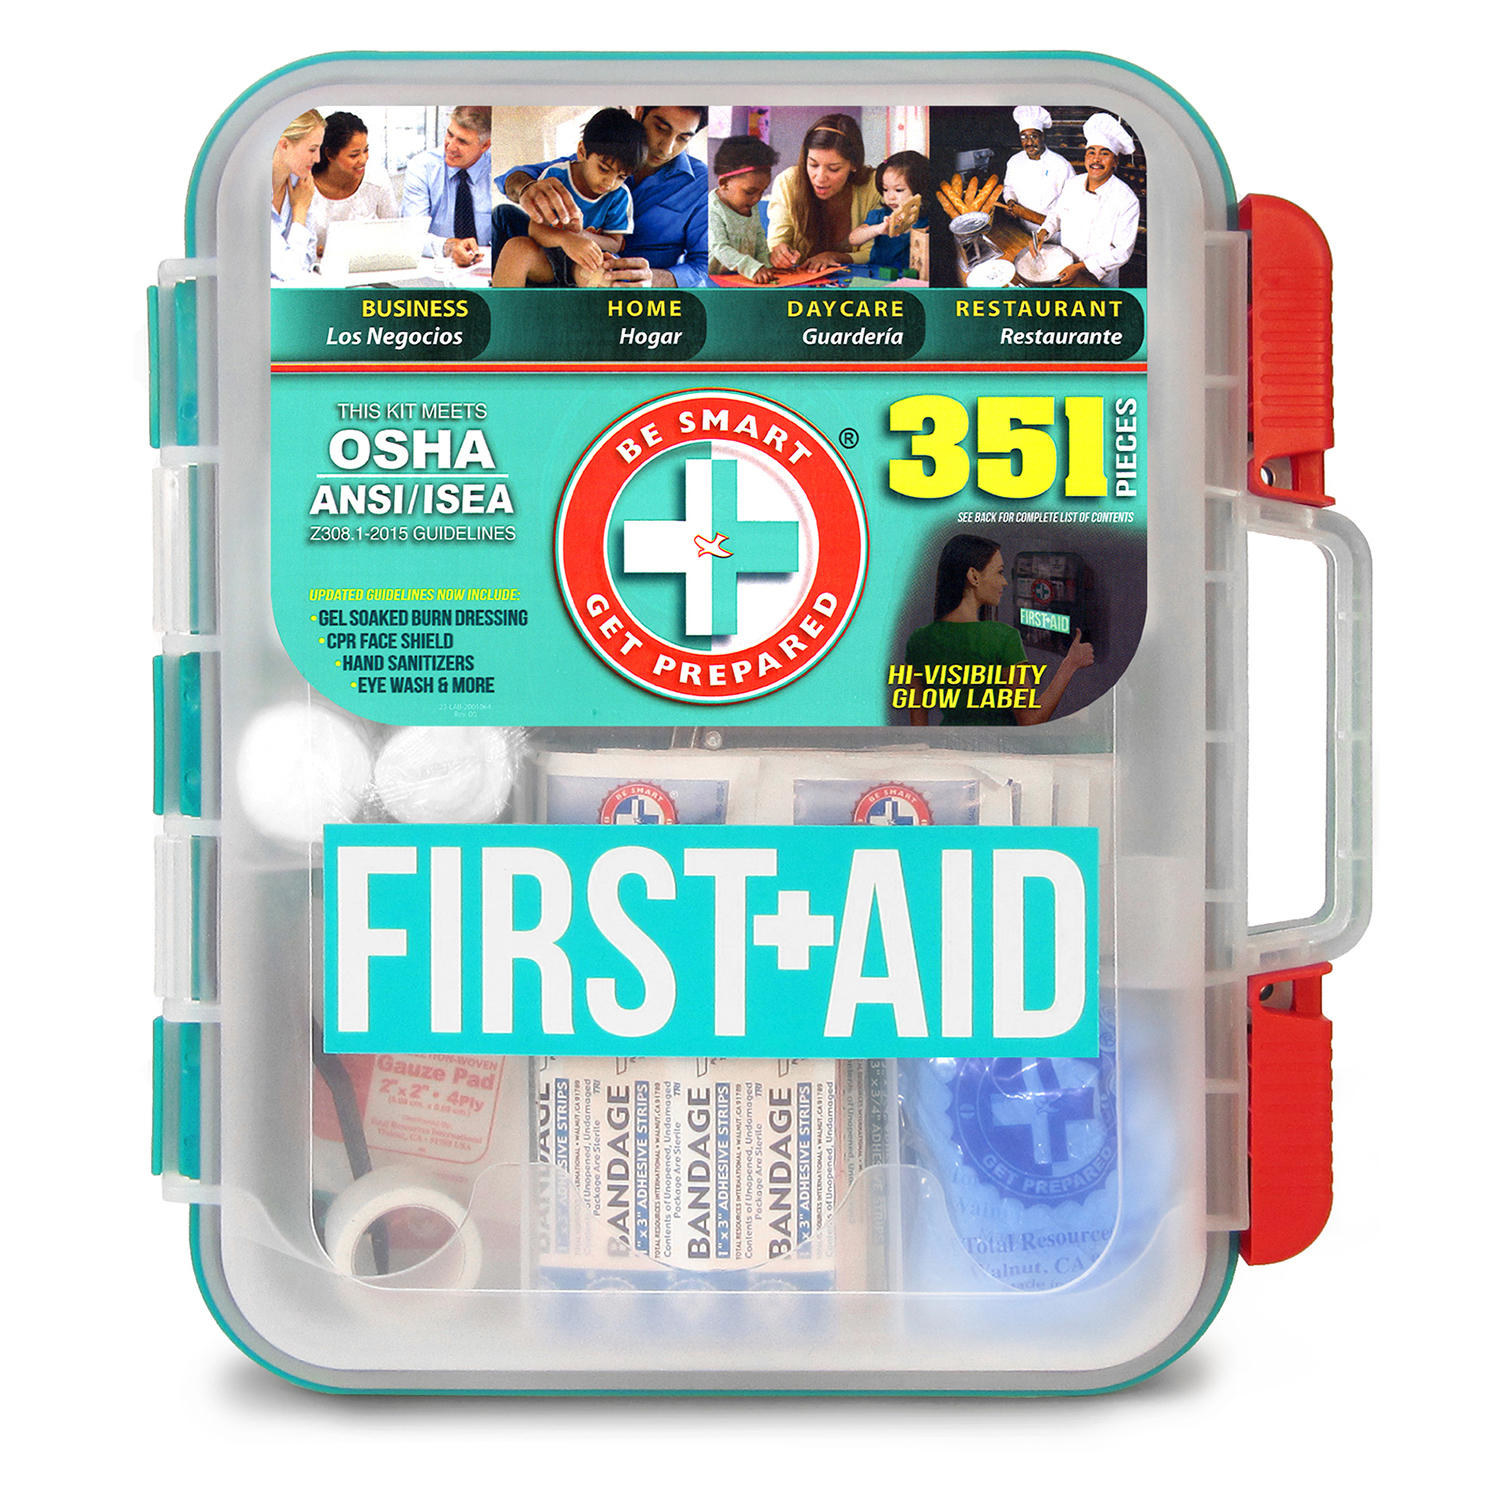 the first-aid kit